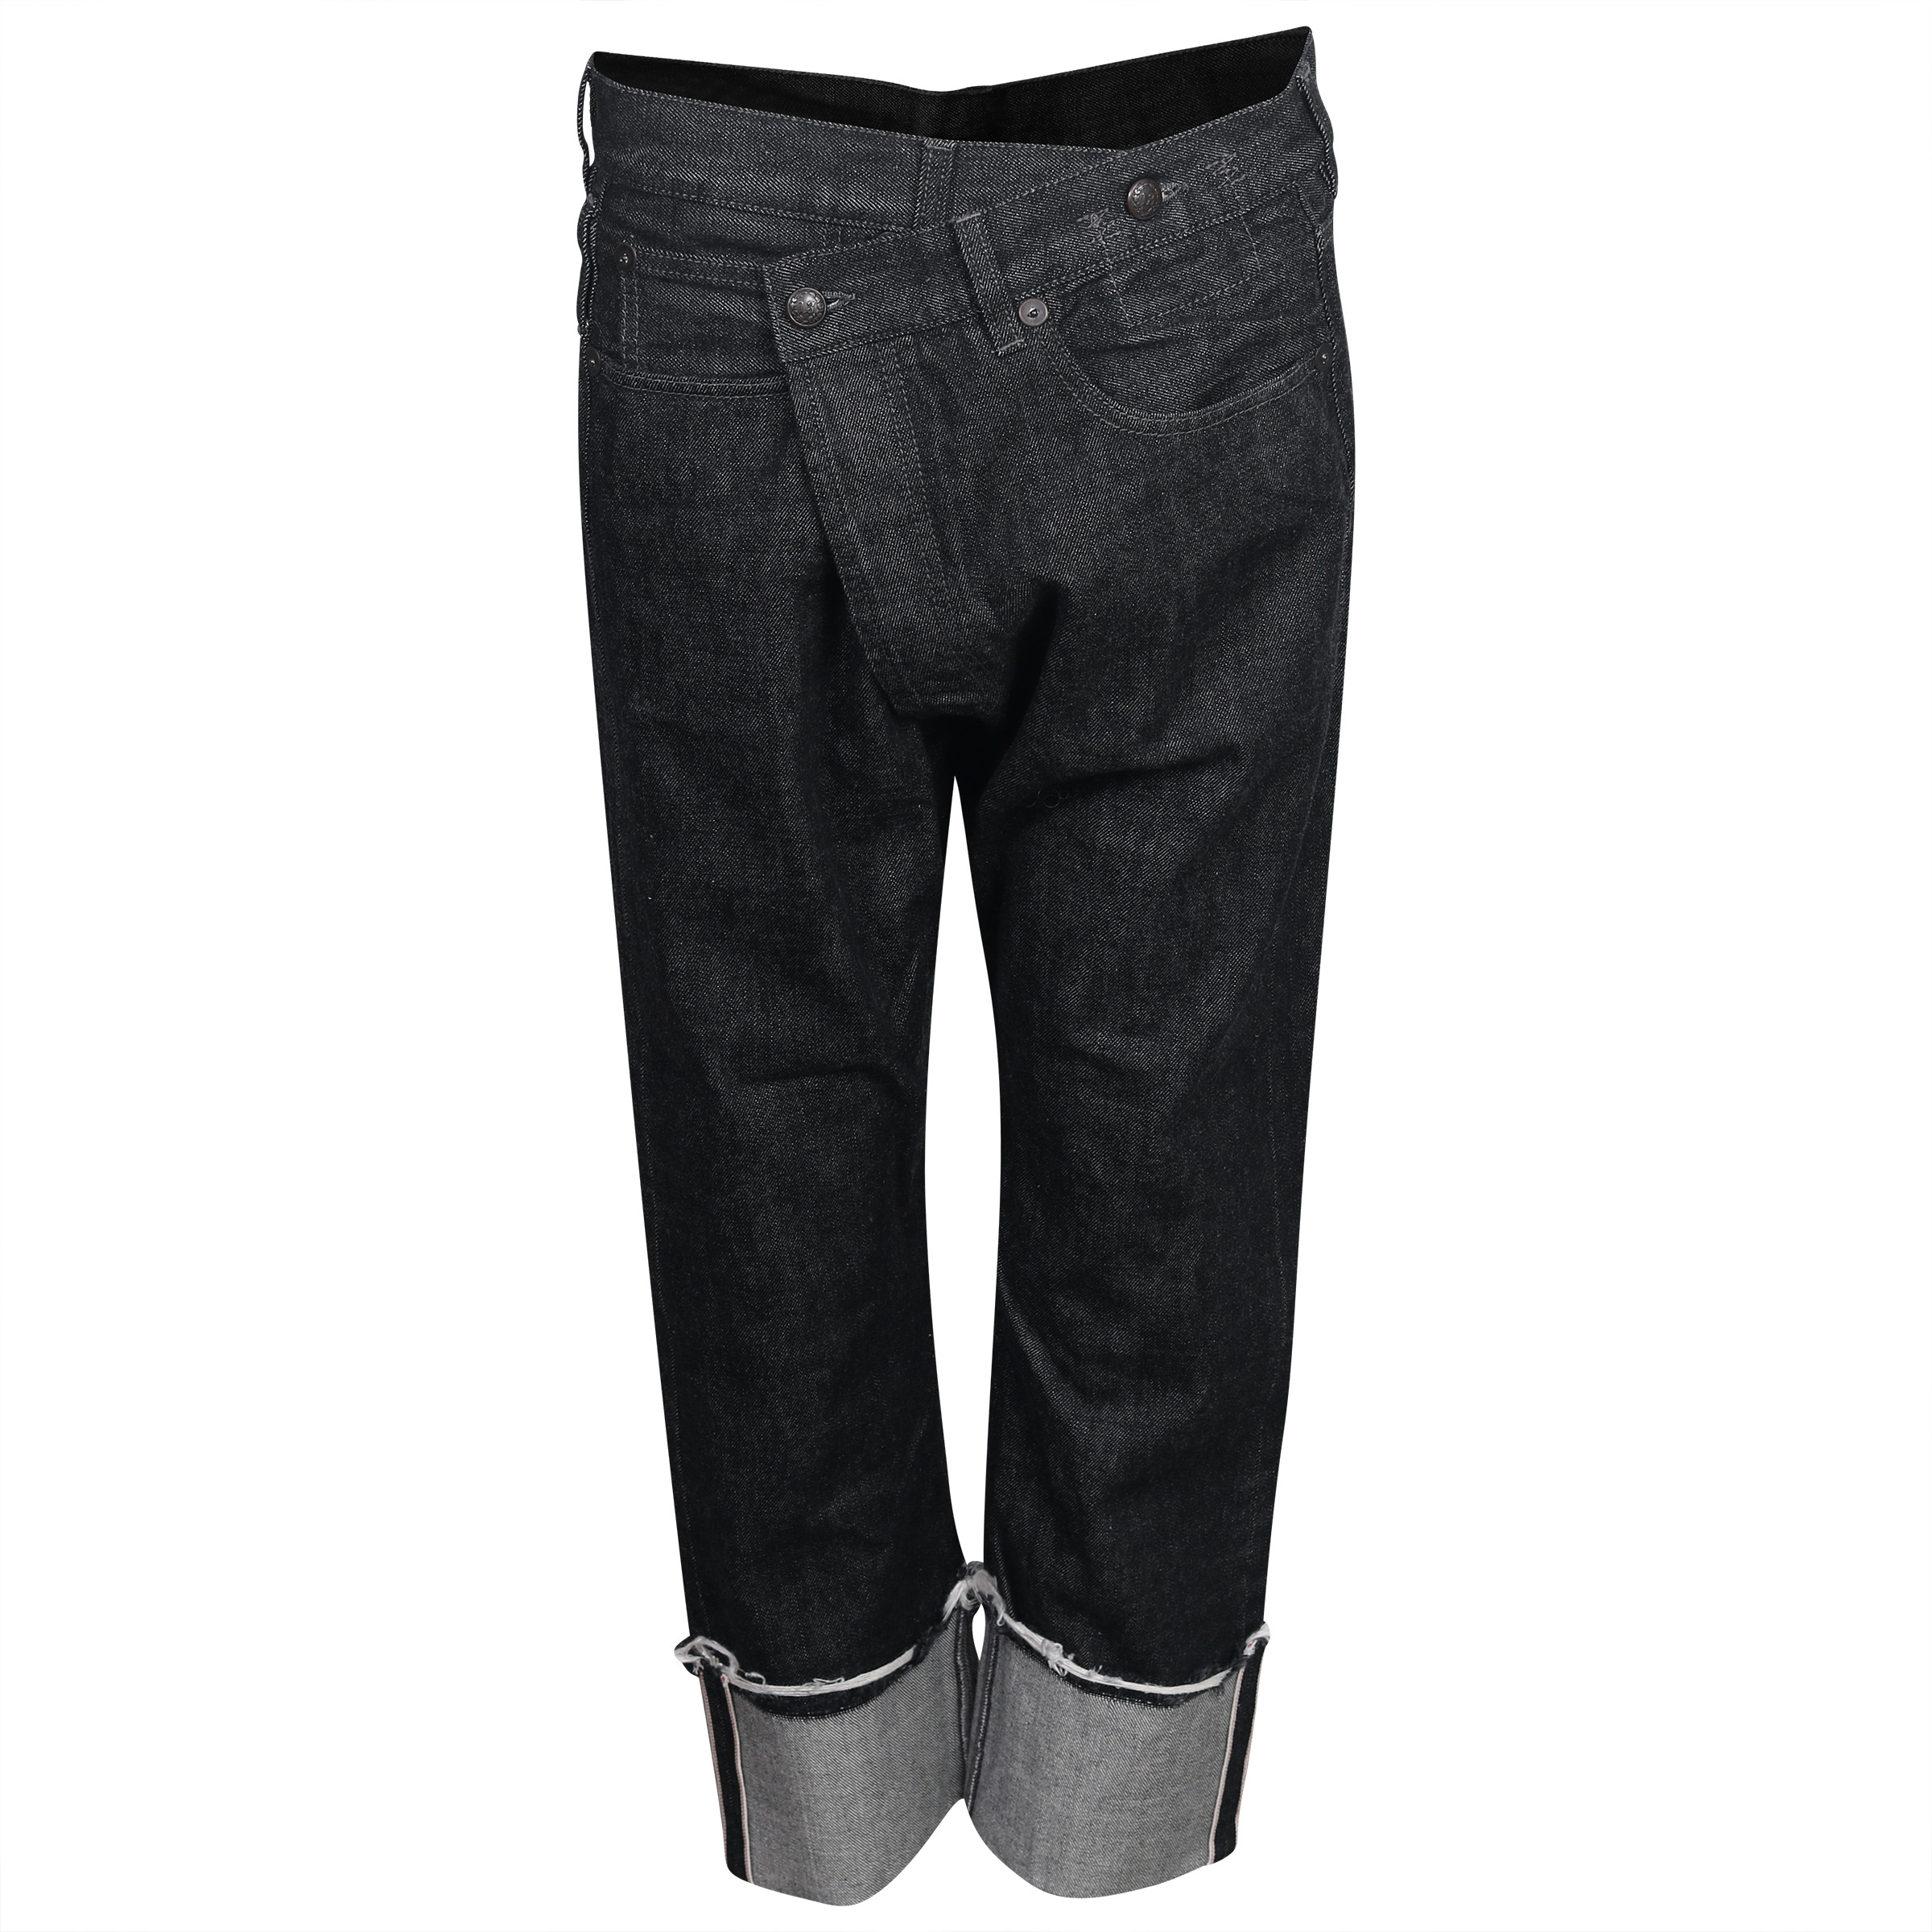 R13 Cross Over Jeans with Cuff in Black 26